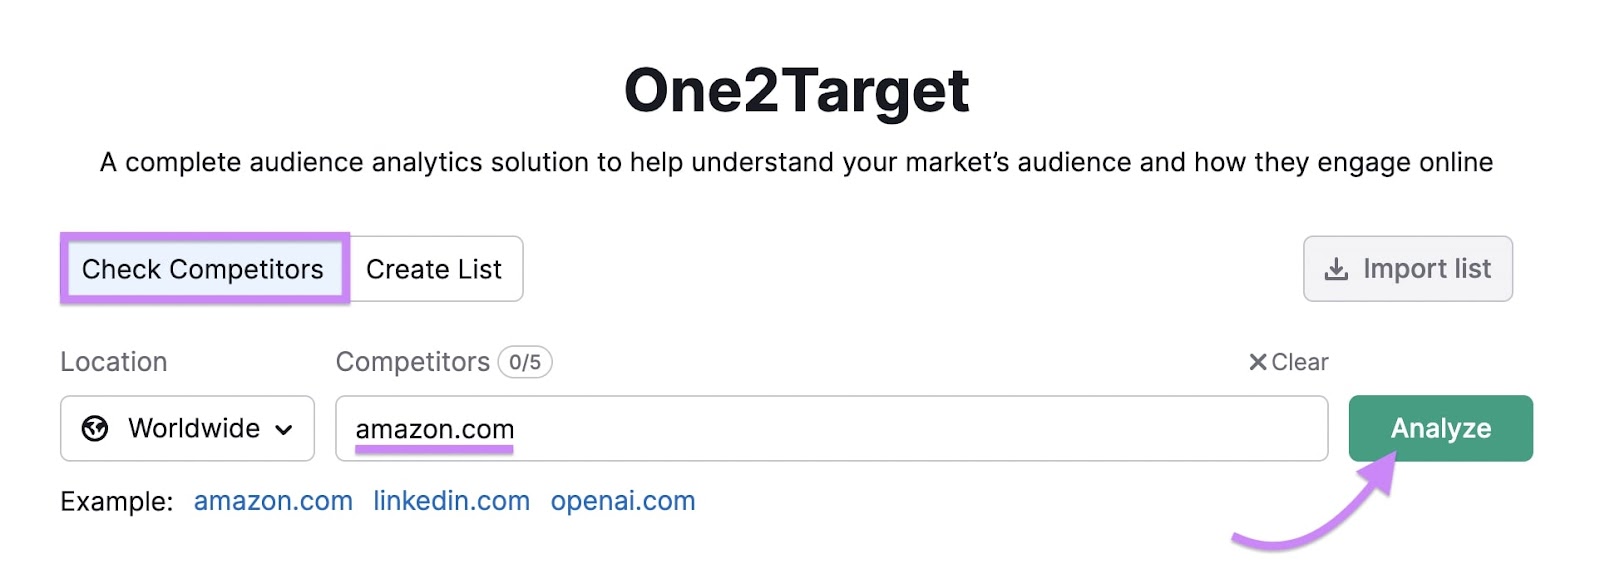 "amazon.com" entered into the One2Target tool